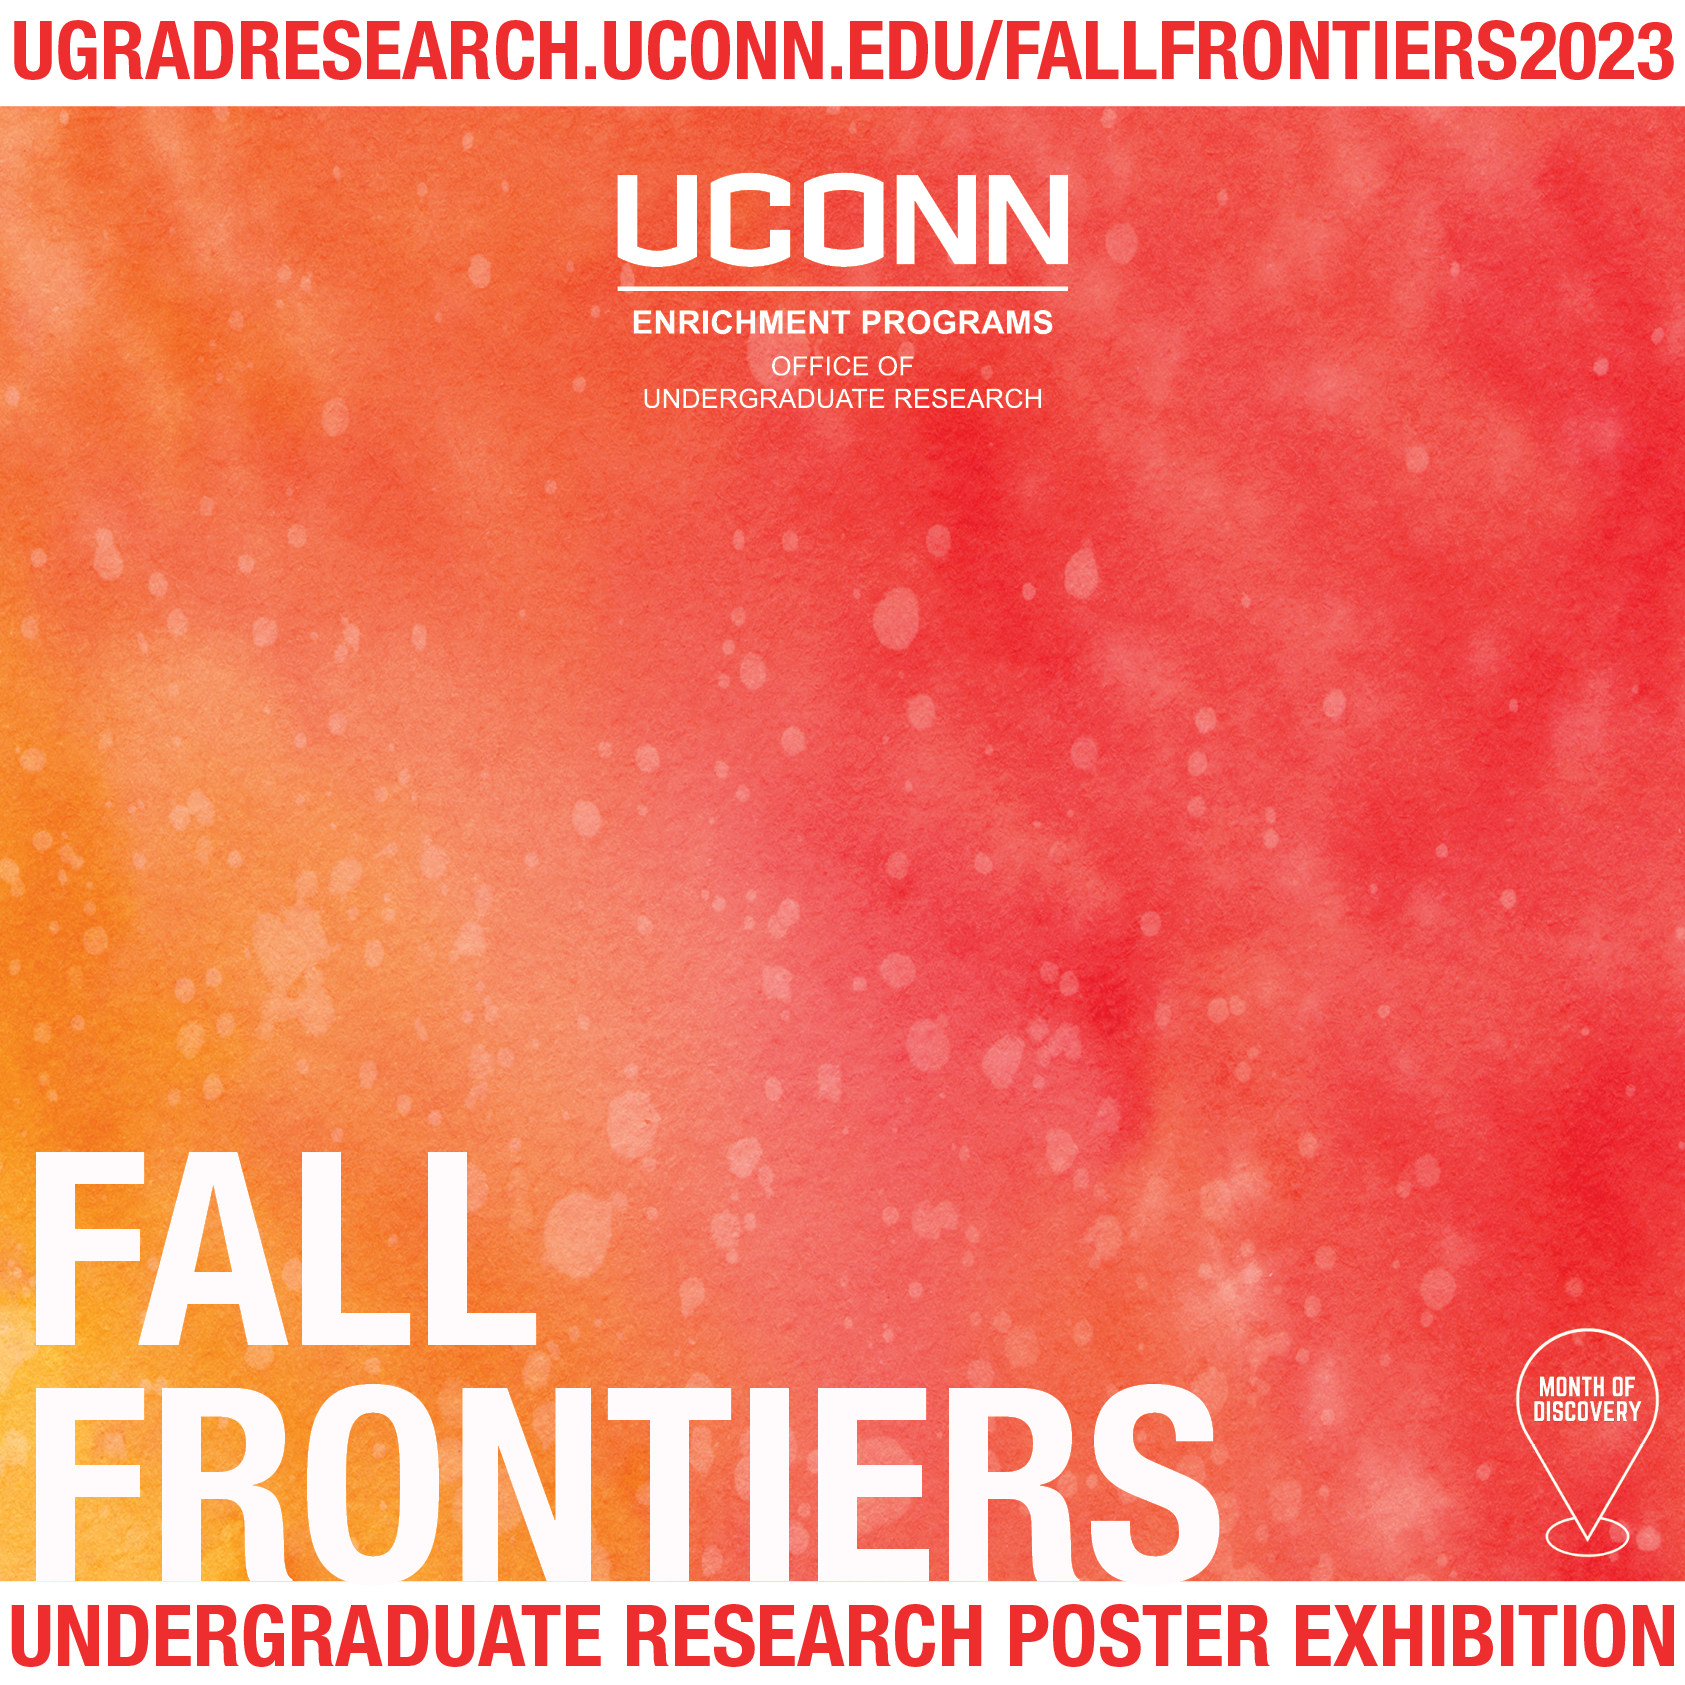 Red and yellow background with Fall Frontiers 2023 in white text.